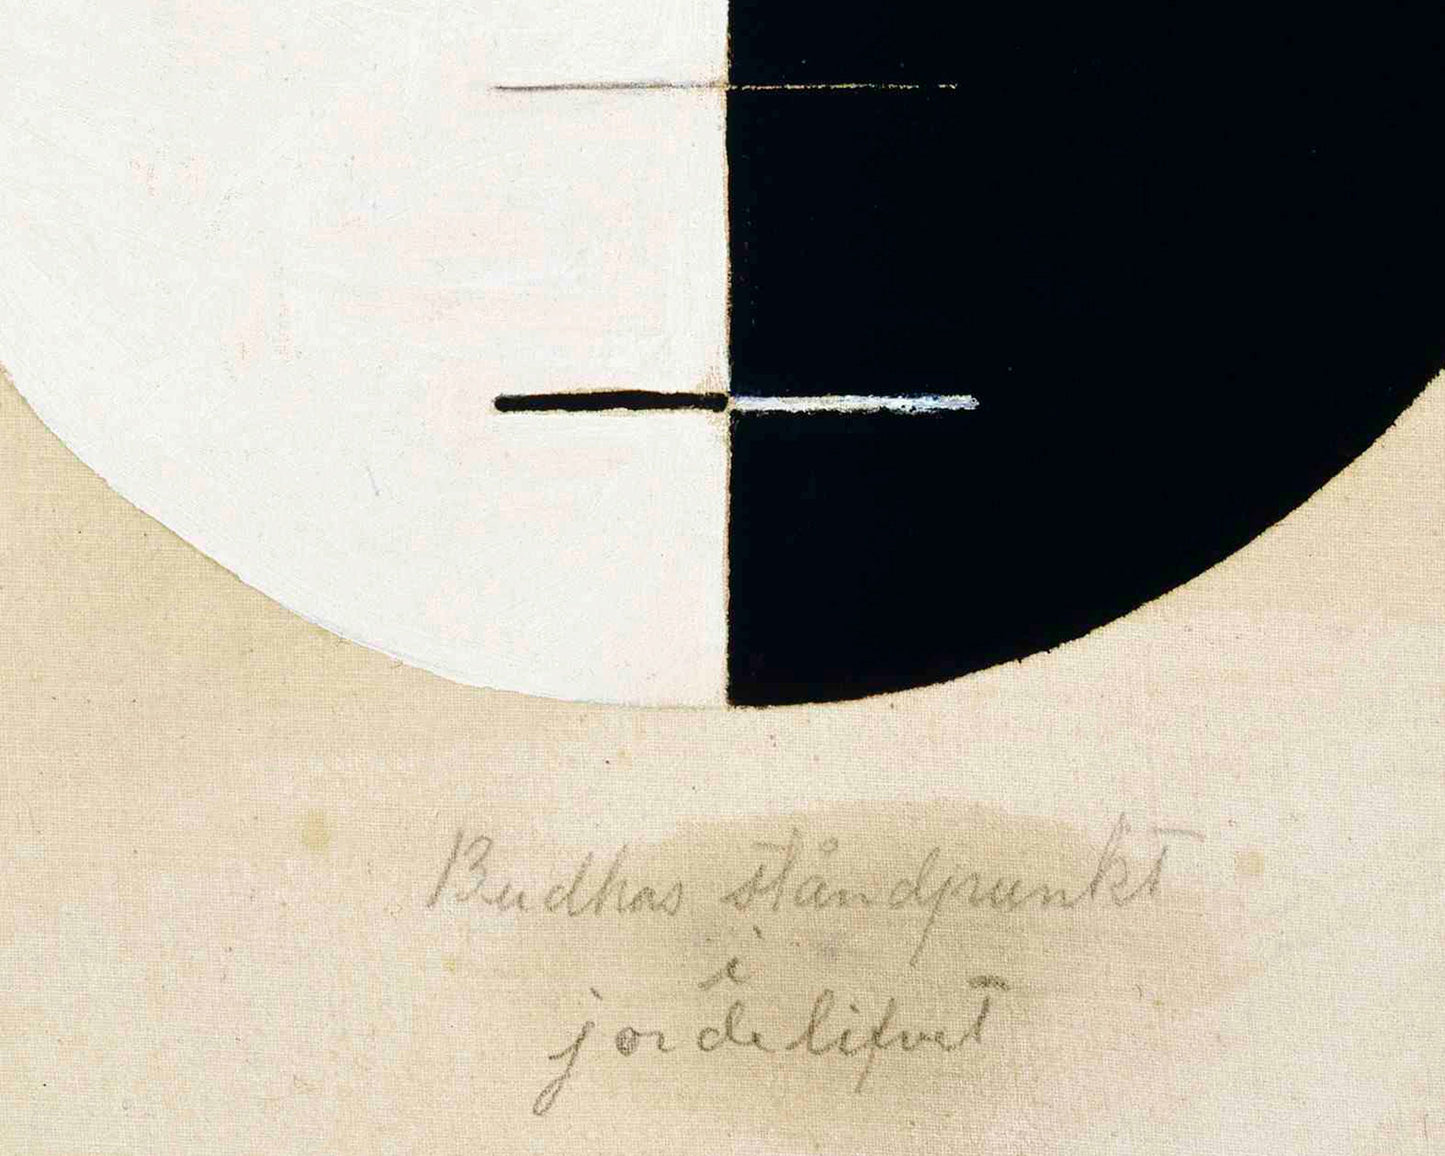 Vintage Hilma af Klint abstract art | Buddha's Standpoint in the Earthly Life | Feminist art | Minimalist wall art